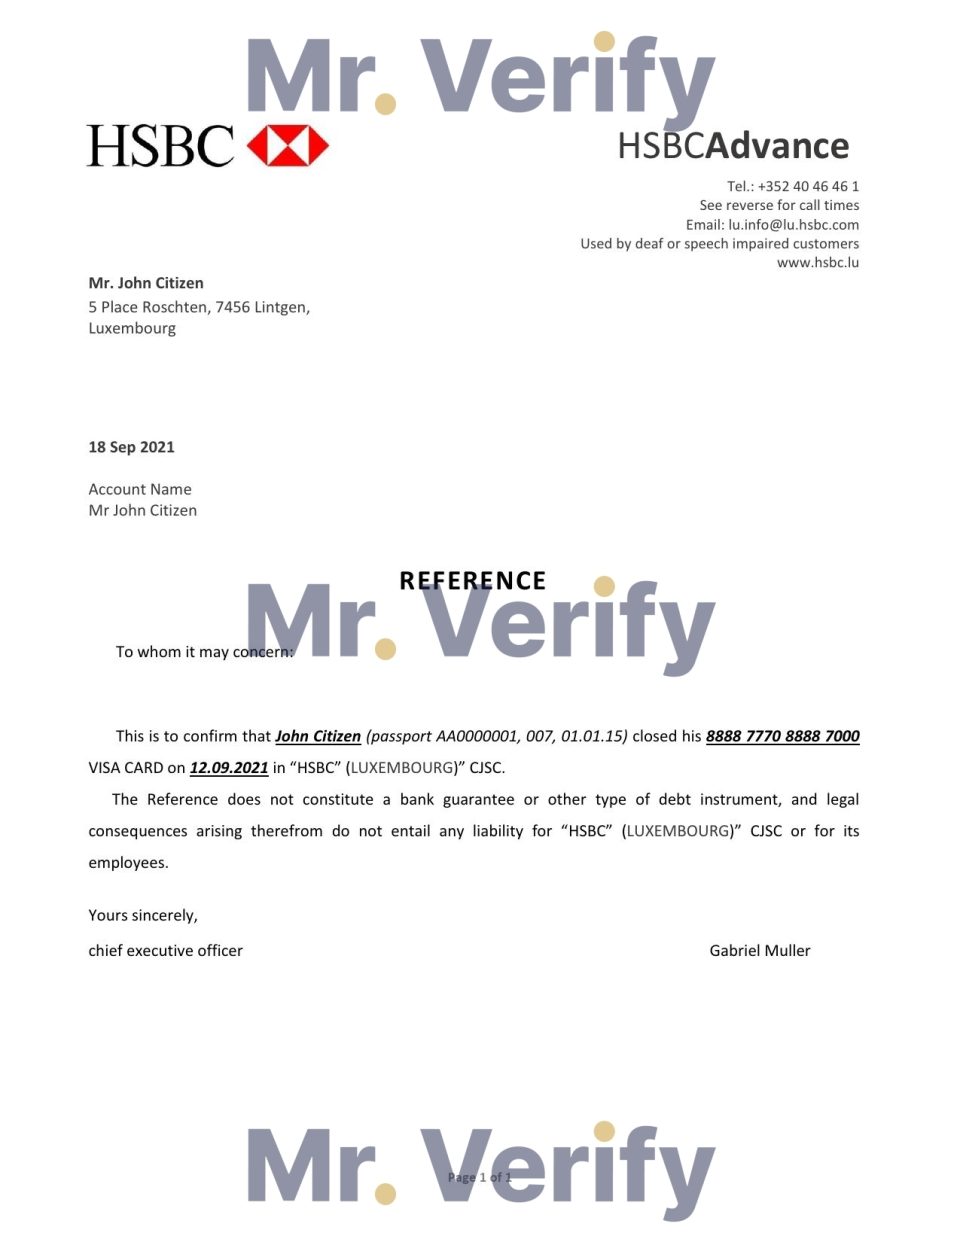 Download Luxembourg HSBC Bank Reference Letter Templates | Editable Word